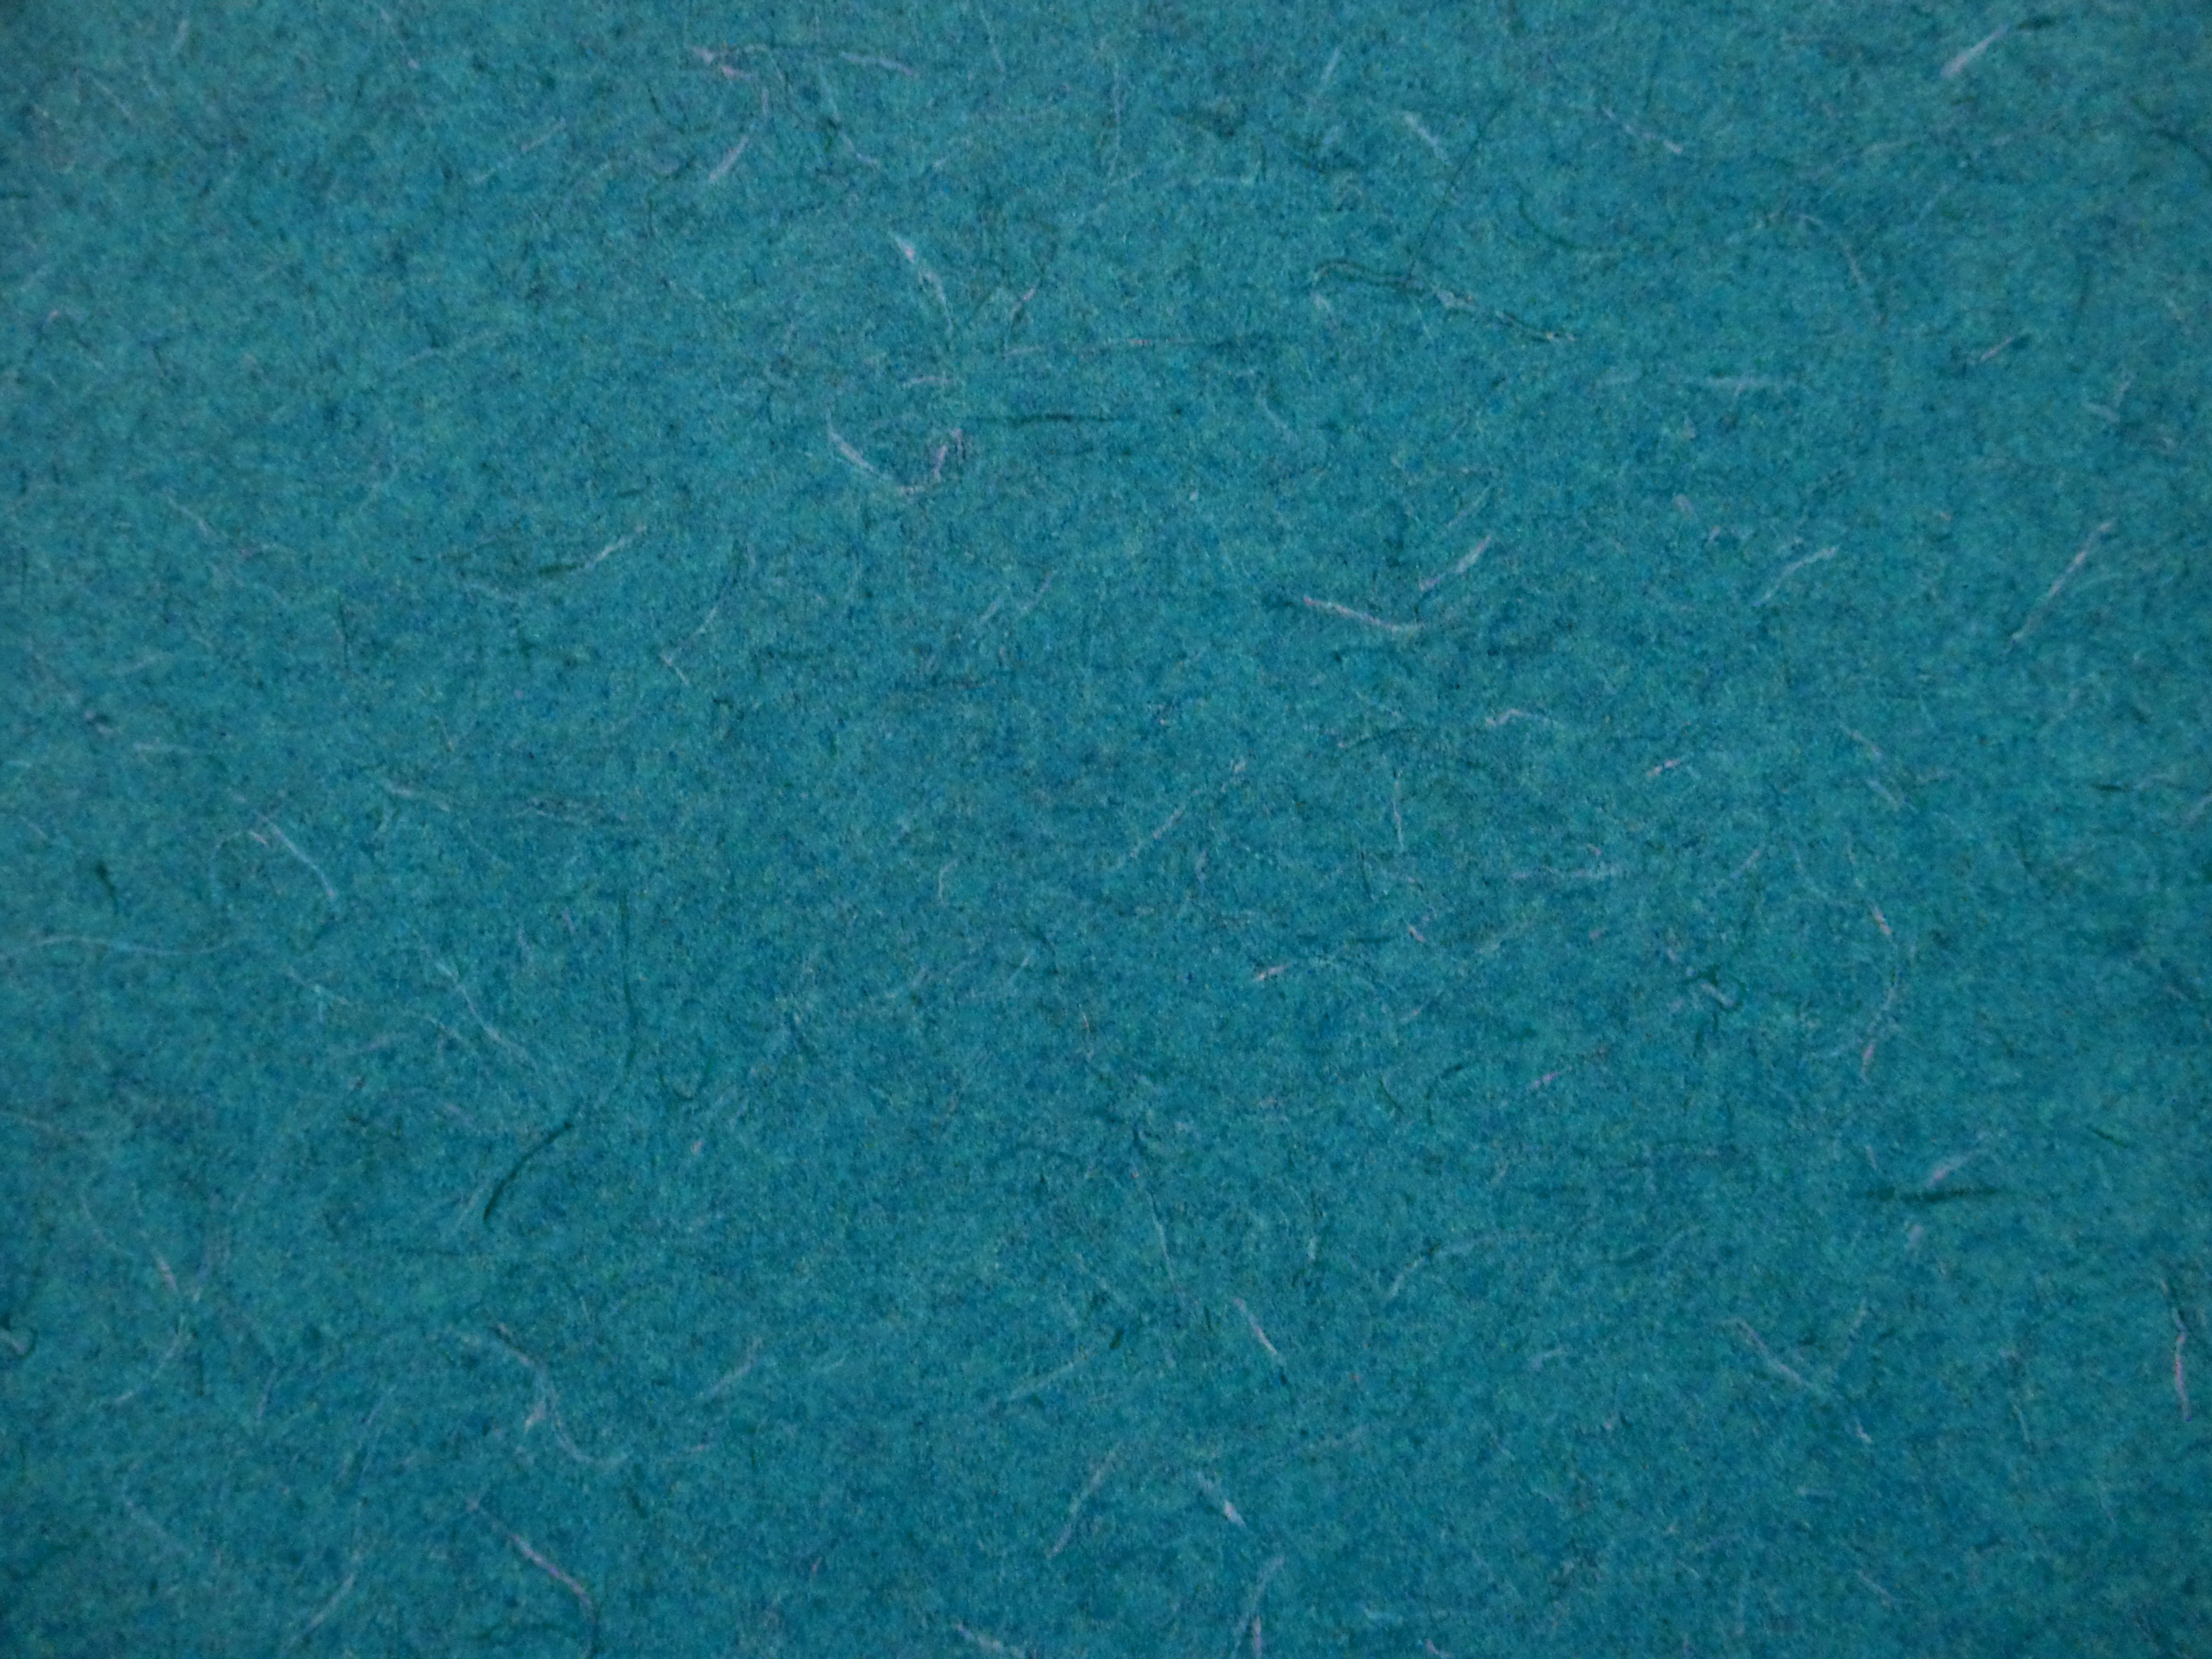 Teal Abstract Pattern Laminate Countertop Texture Picture ...